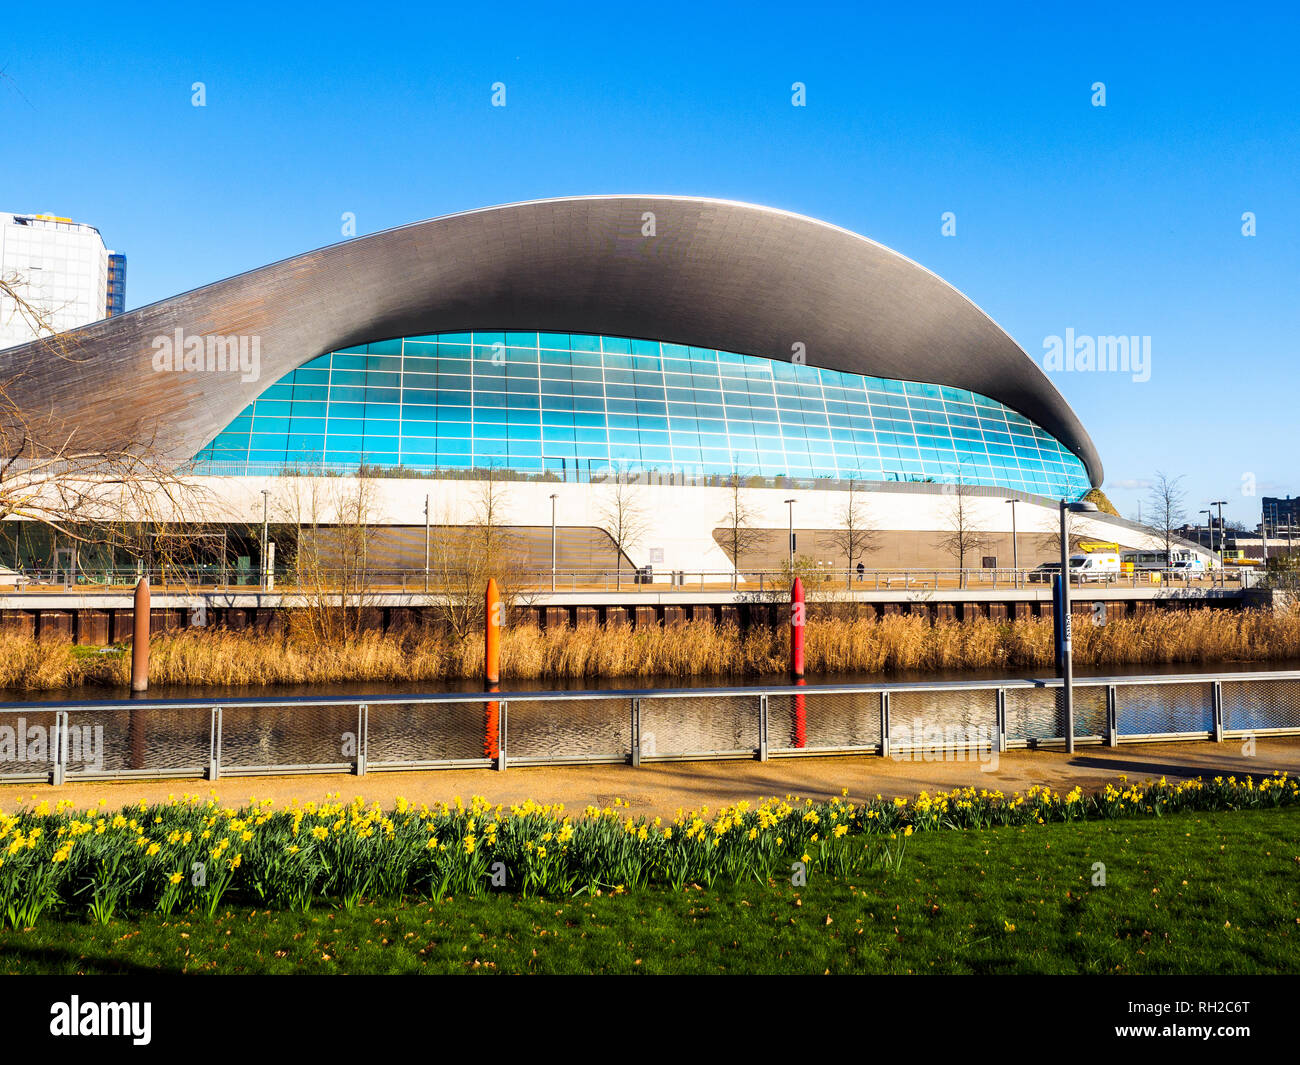 London Aquatics Centre at the Queen Elizabeth Olympic Park in Stratford - East London, England Stock Photo